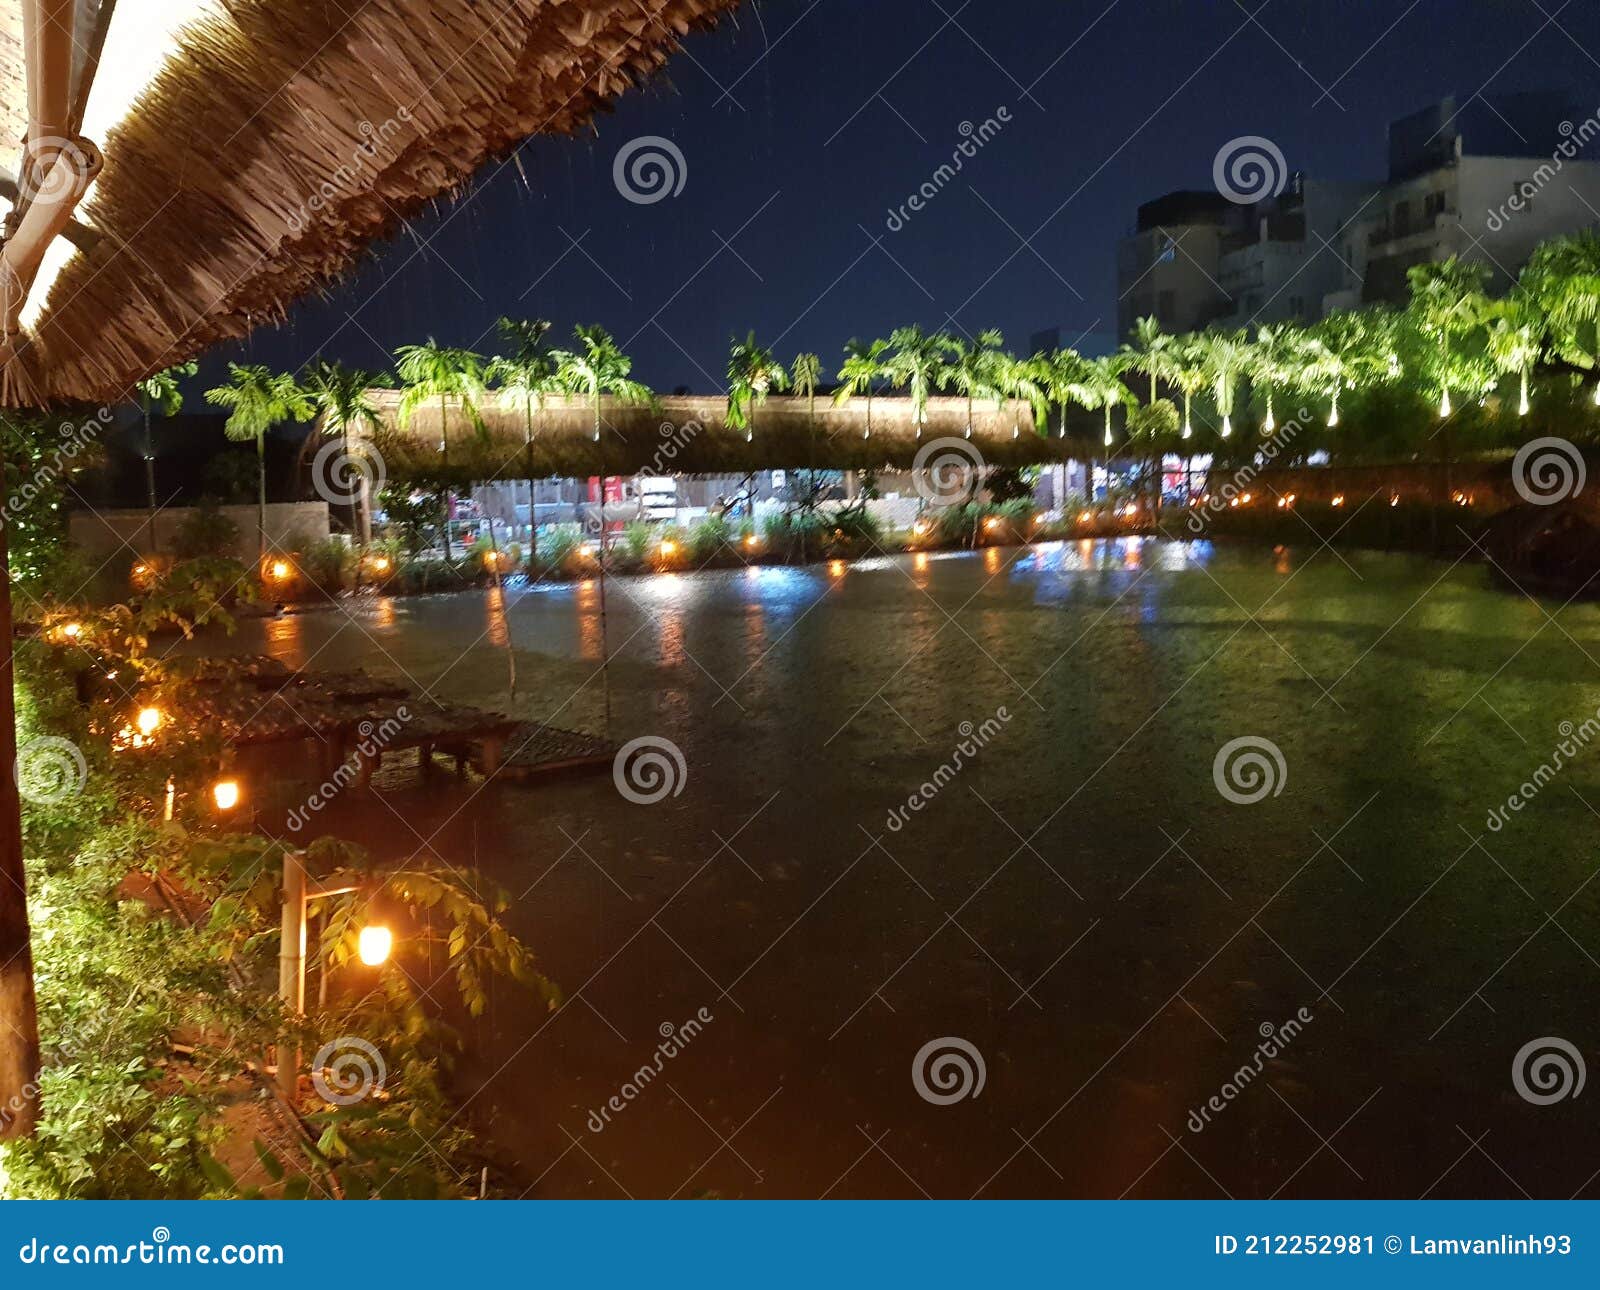 39 558 Ancient Restaurant Photos Free Royalty Free Stock Photos From Dreamstime